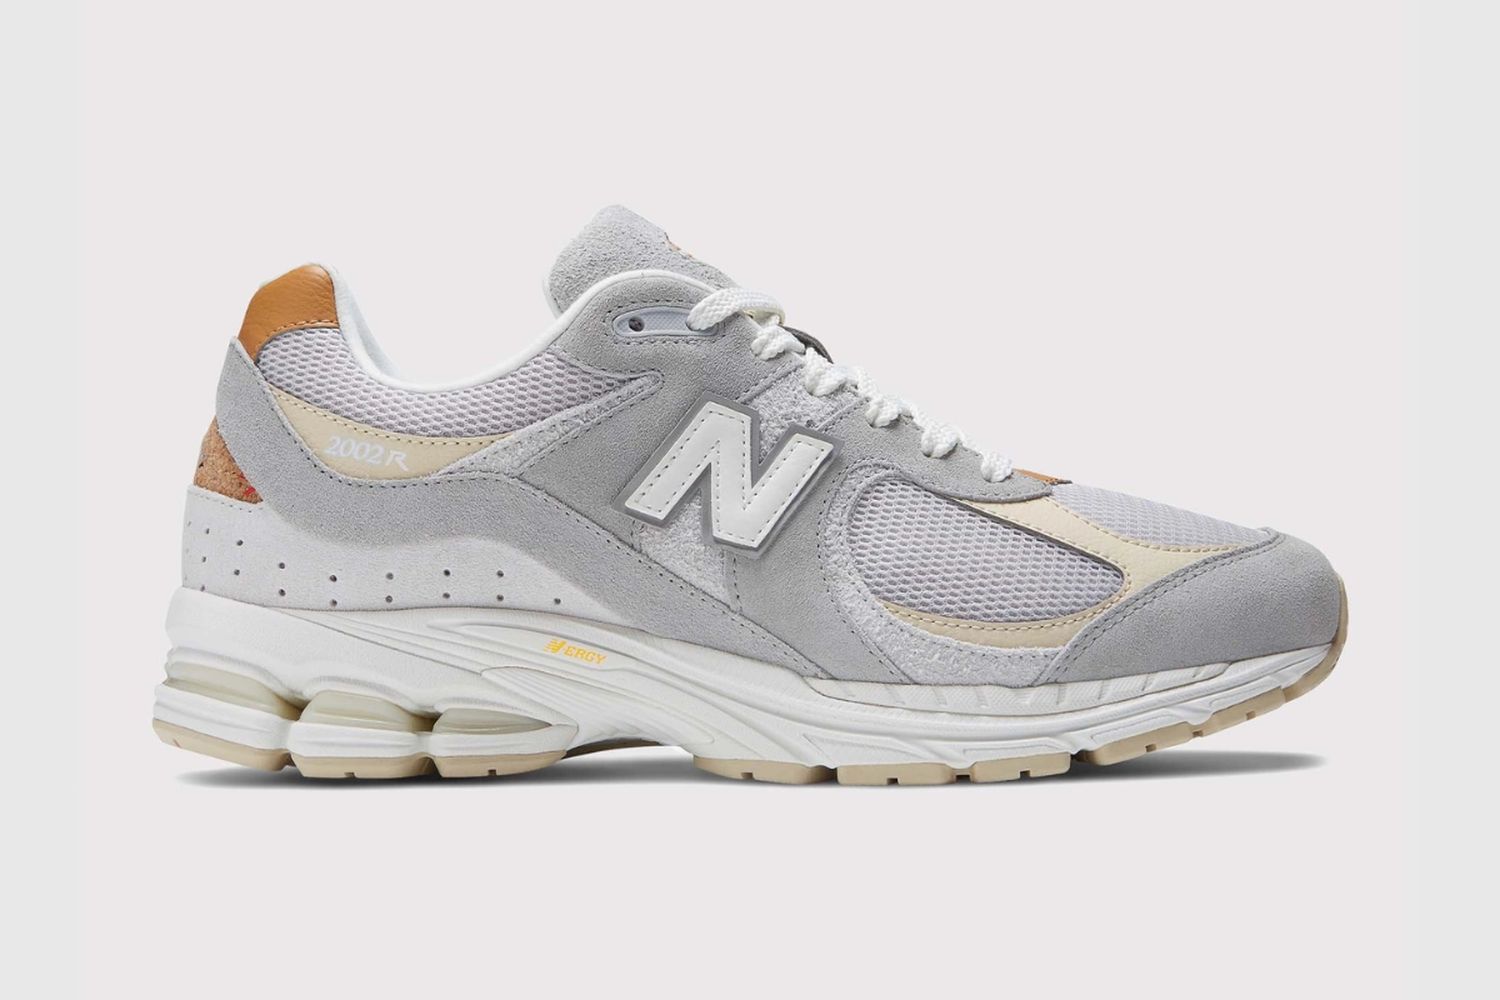 17 Classic Sneakers That Should Be in Any Collection